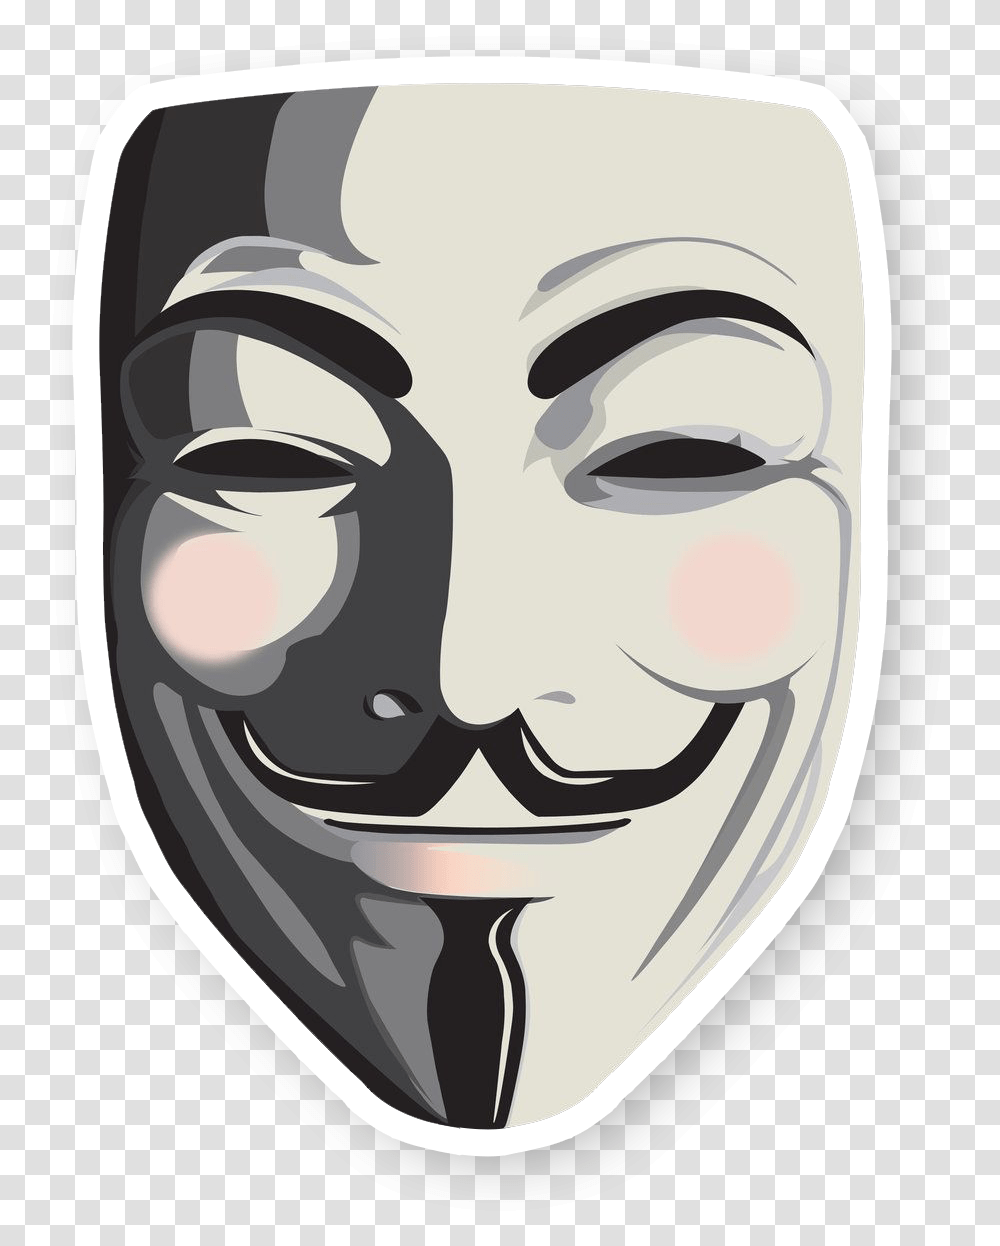 Guys Fawkes Mask Guy Fawkes Mask, Head Transparent Png